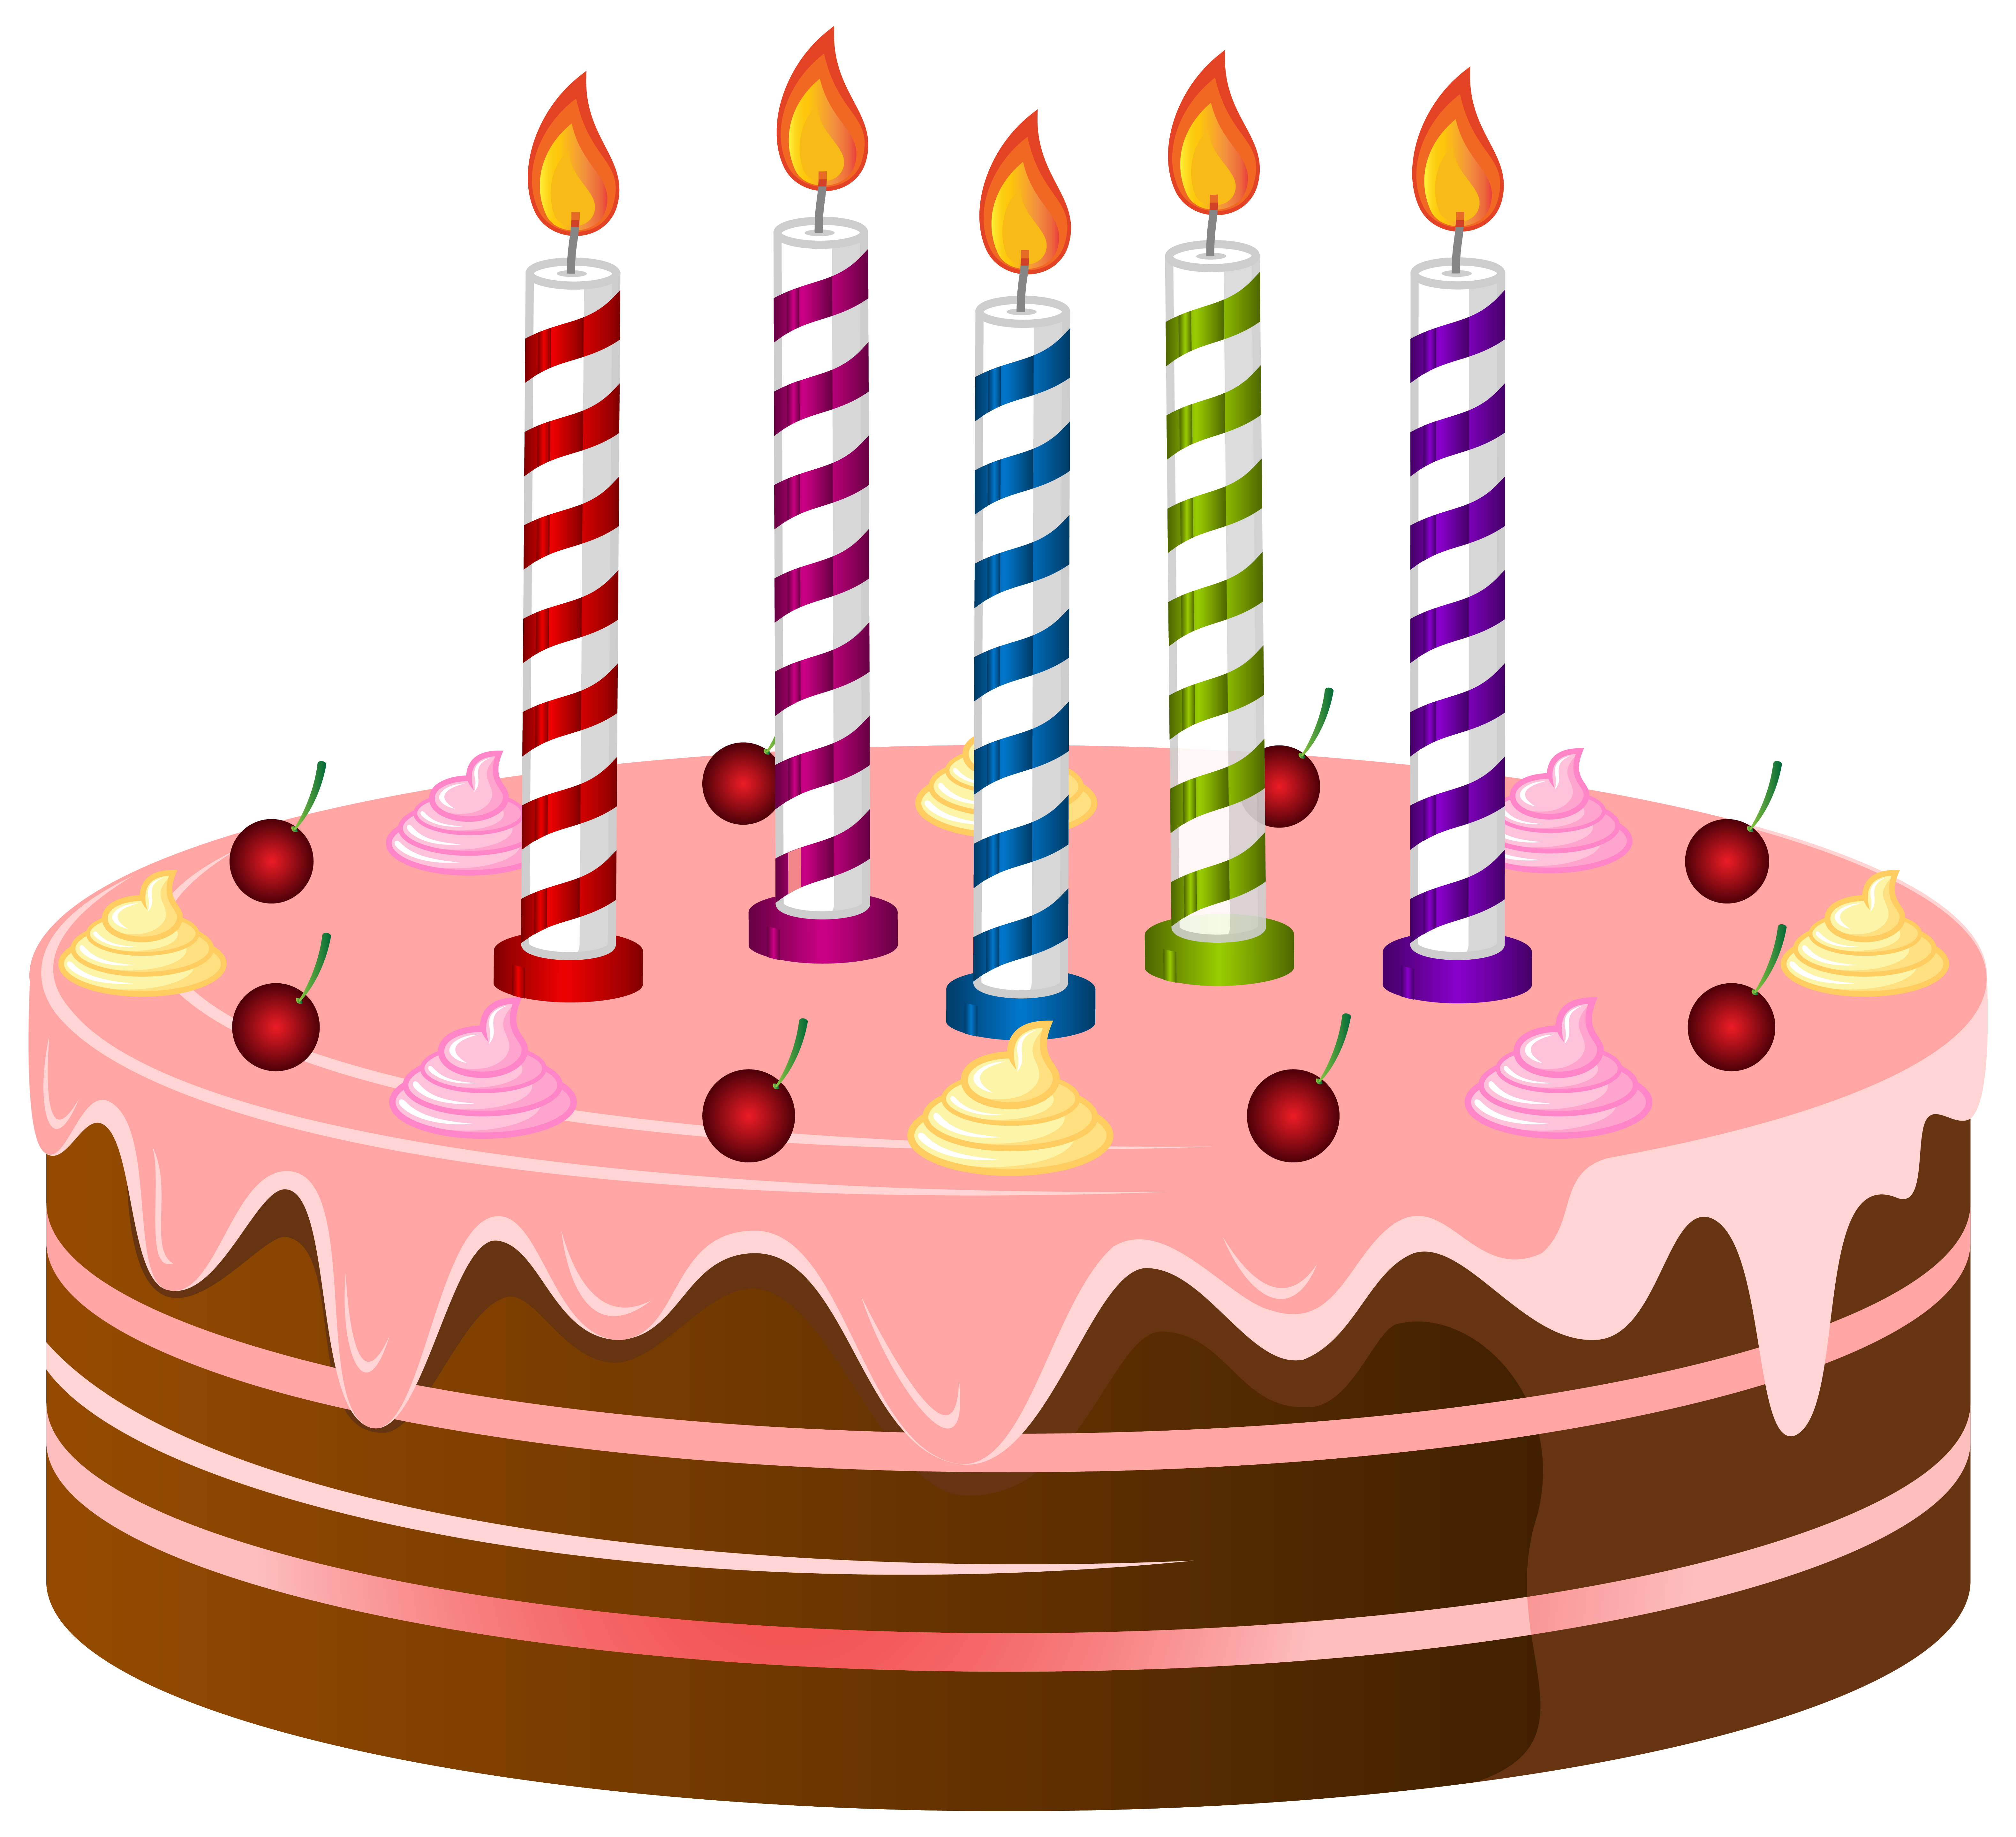 candles with cake picture transparent #40713